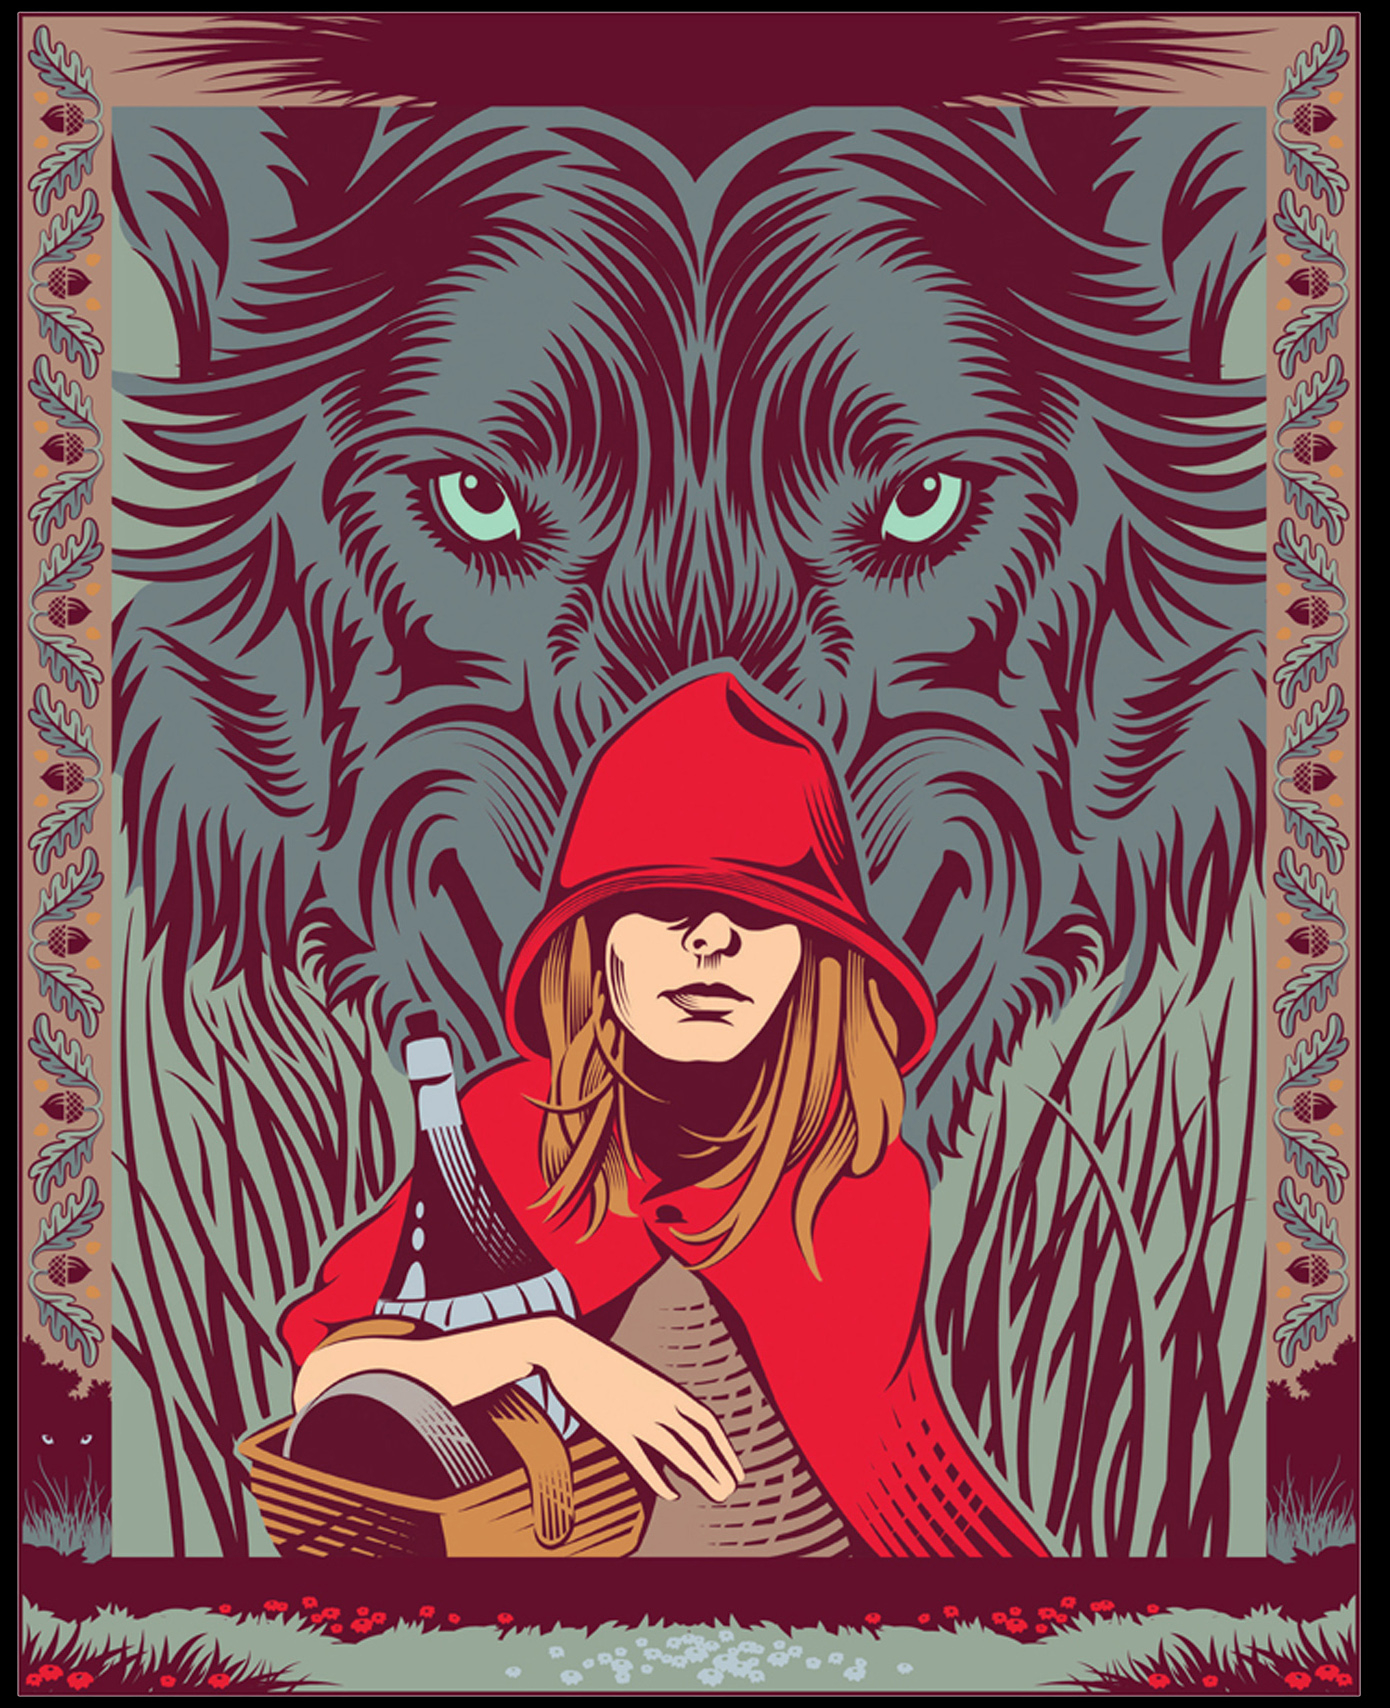 Little Red Riding Hood / Grimm's Tales